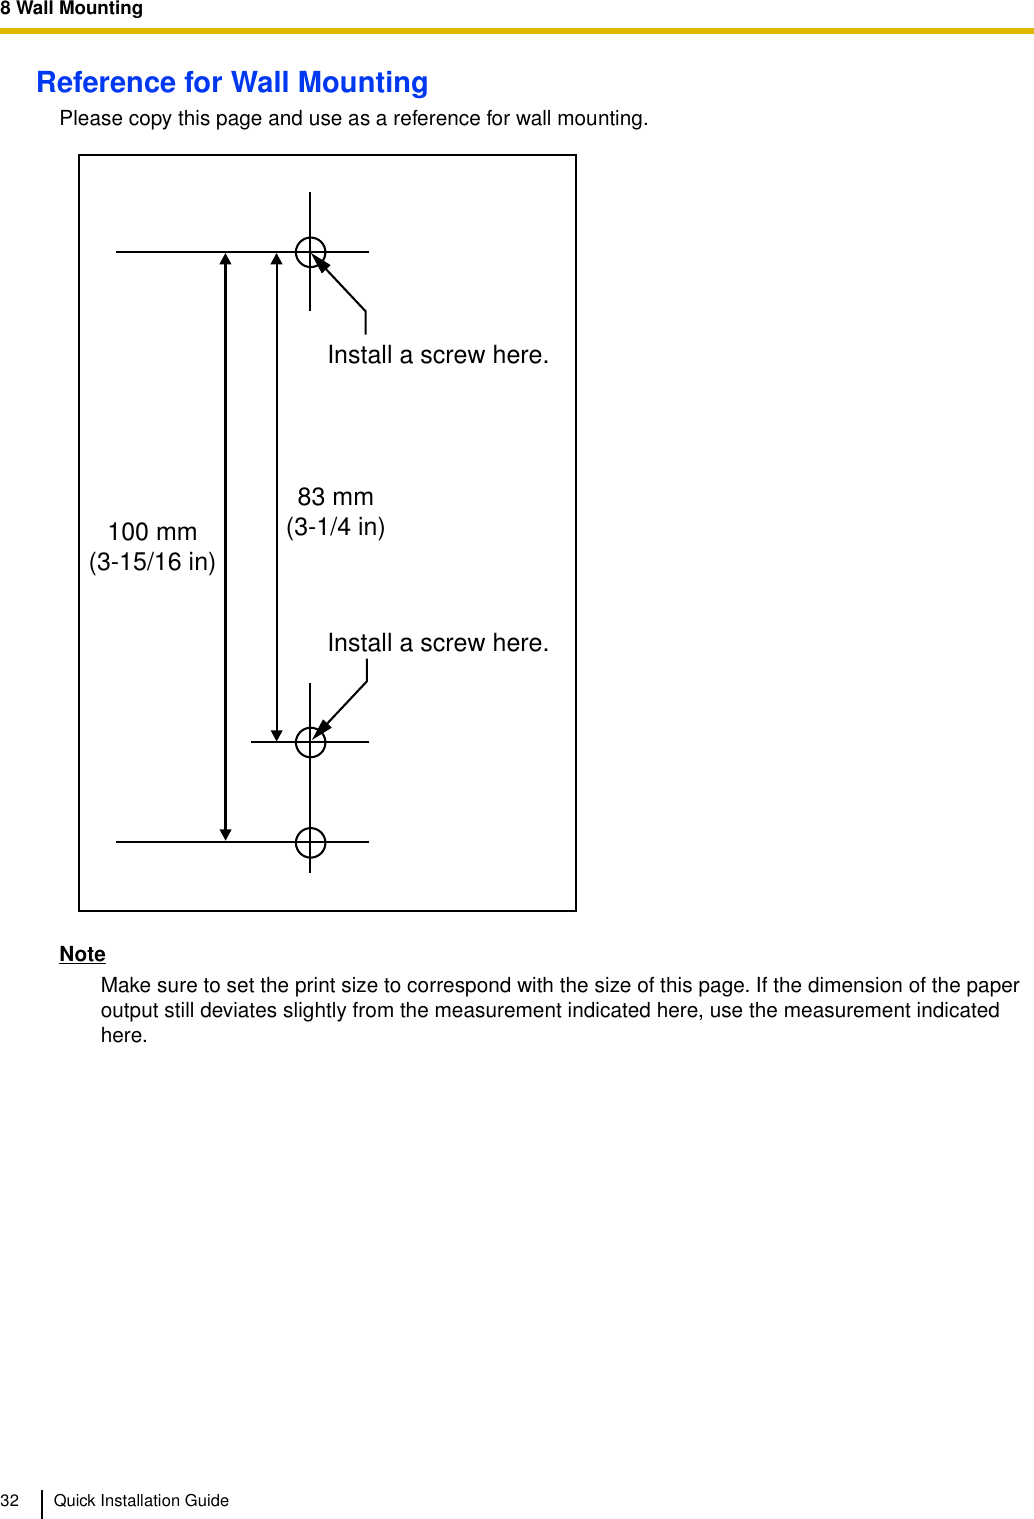 8 Wall Mounting32 Quick Installation GuideReference for Wall MountingPlease copy this page and use as a reference for wall mounting.NoteMake sure to set the print size to correspond with the size of this page. If the dimension of the paper output still deviates slightly from the measurement indicated here, use the measurement indicated here.Install a screw here.Install a screw here.83 mm(3-1/4 in)100 mm(3-15/16 in)